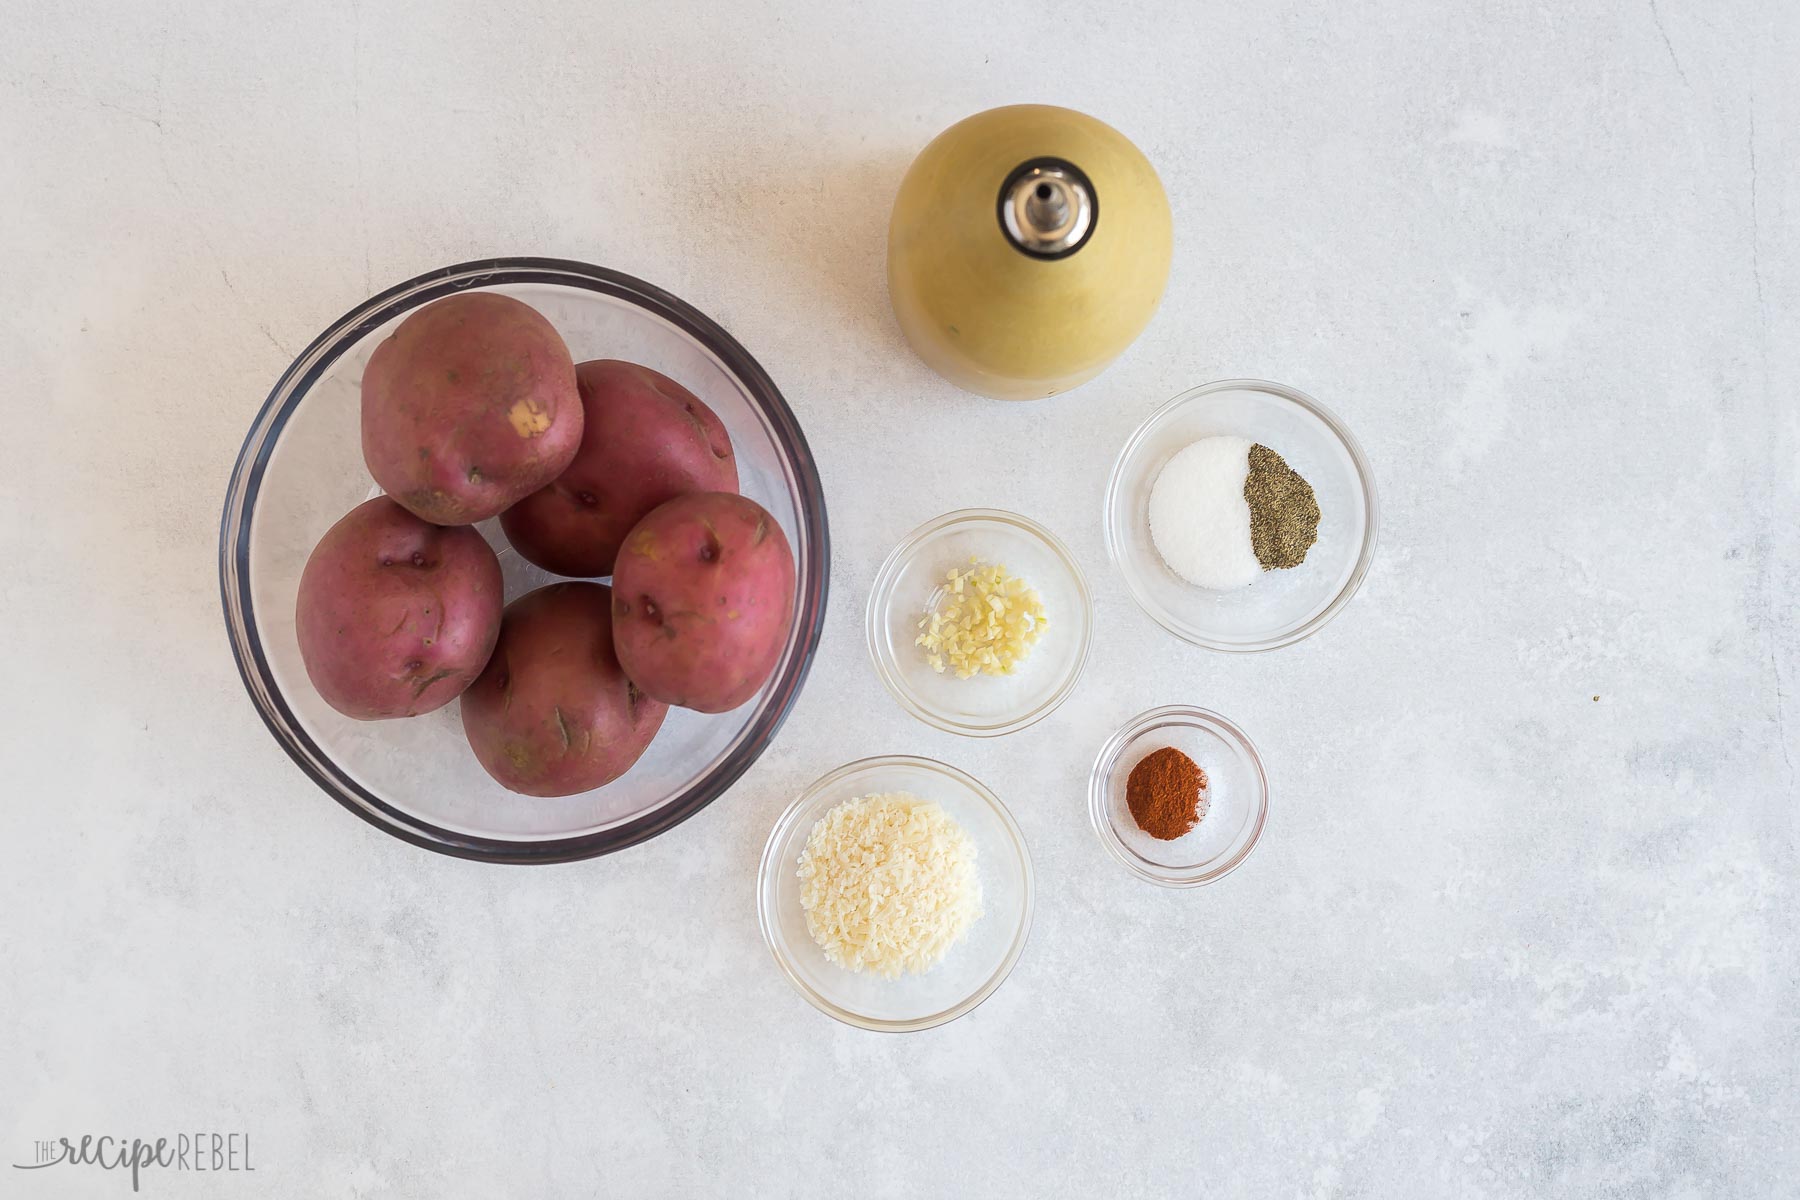 ingredients needed for roasted red potatoes